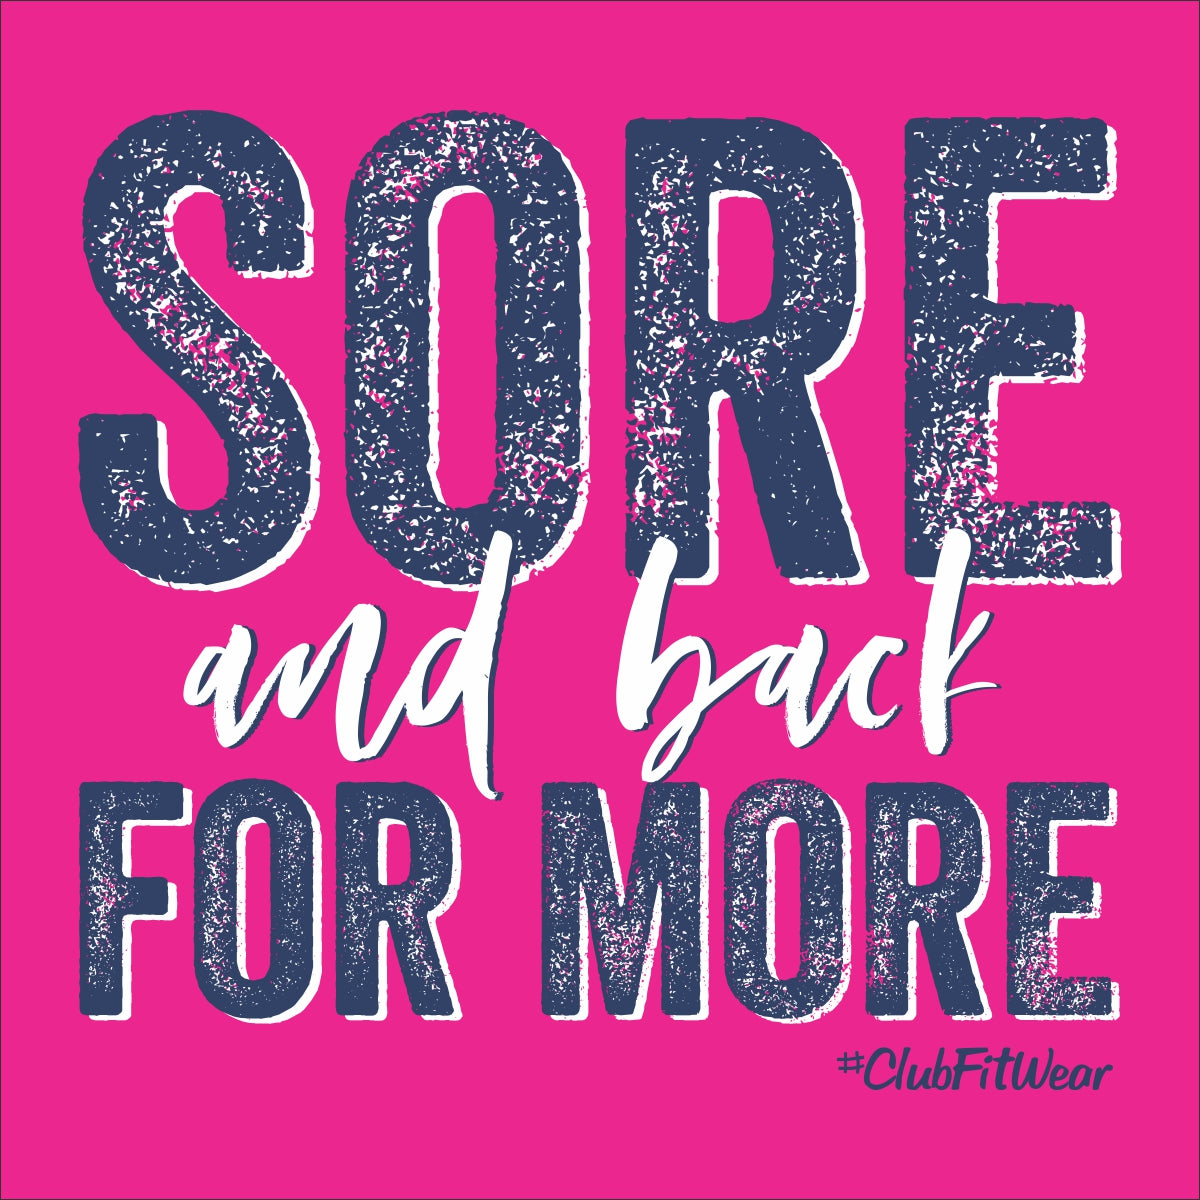 Sore and back for More